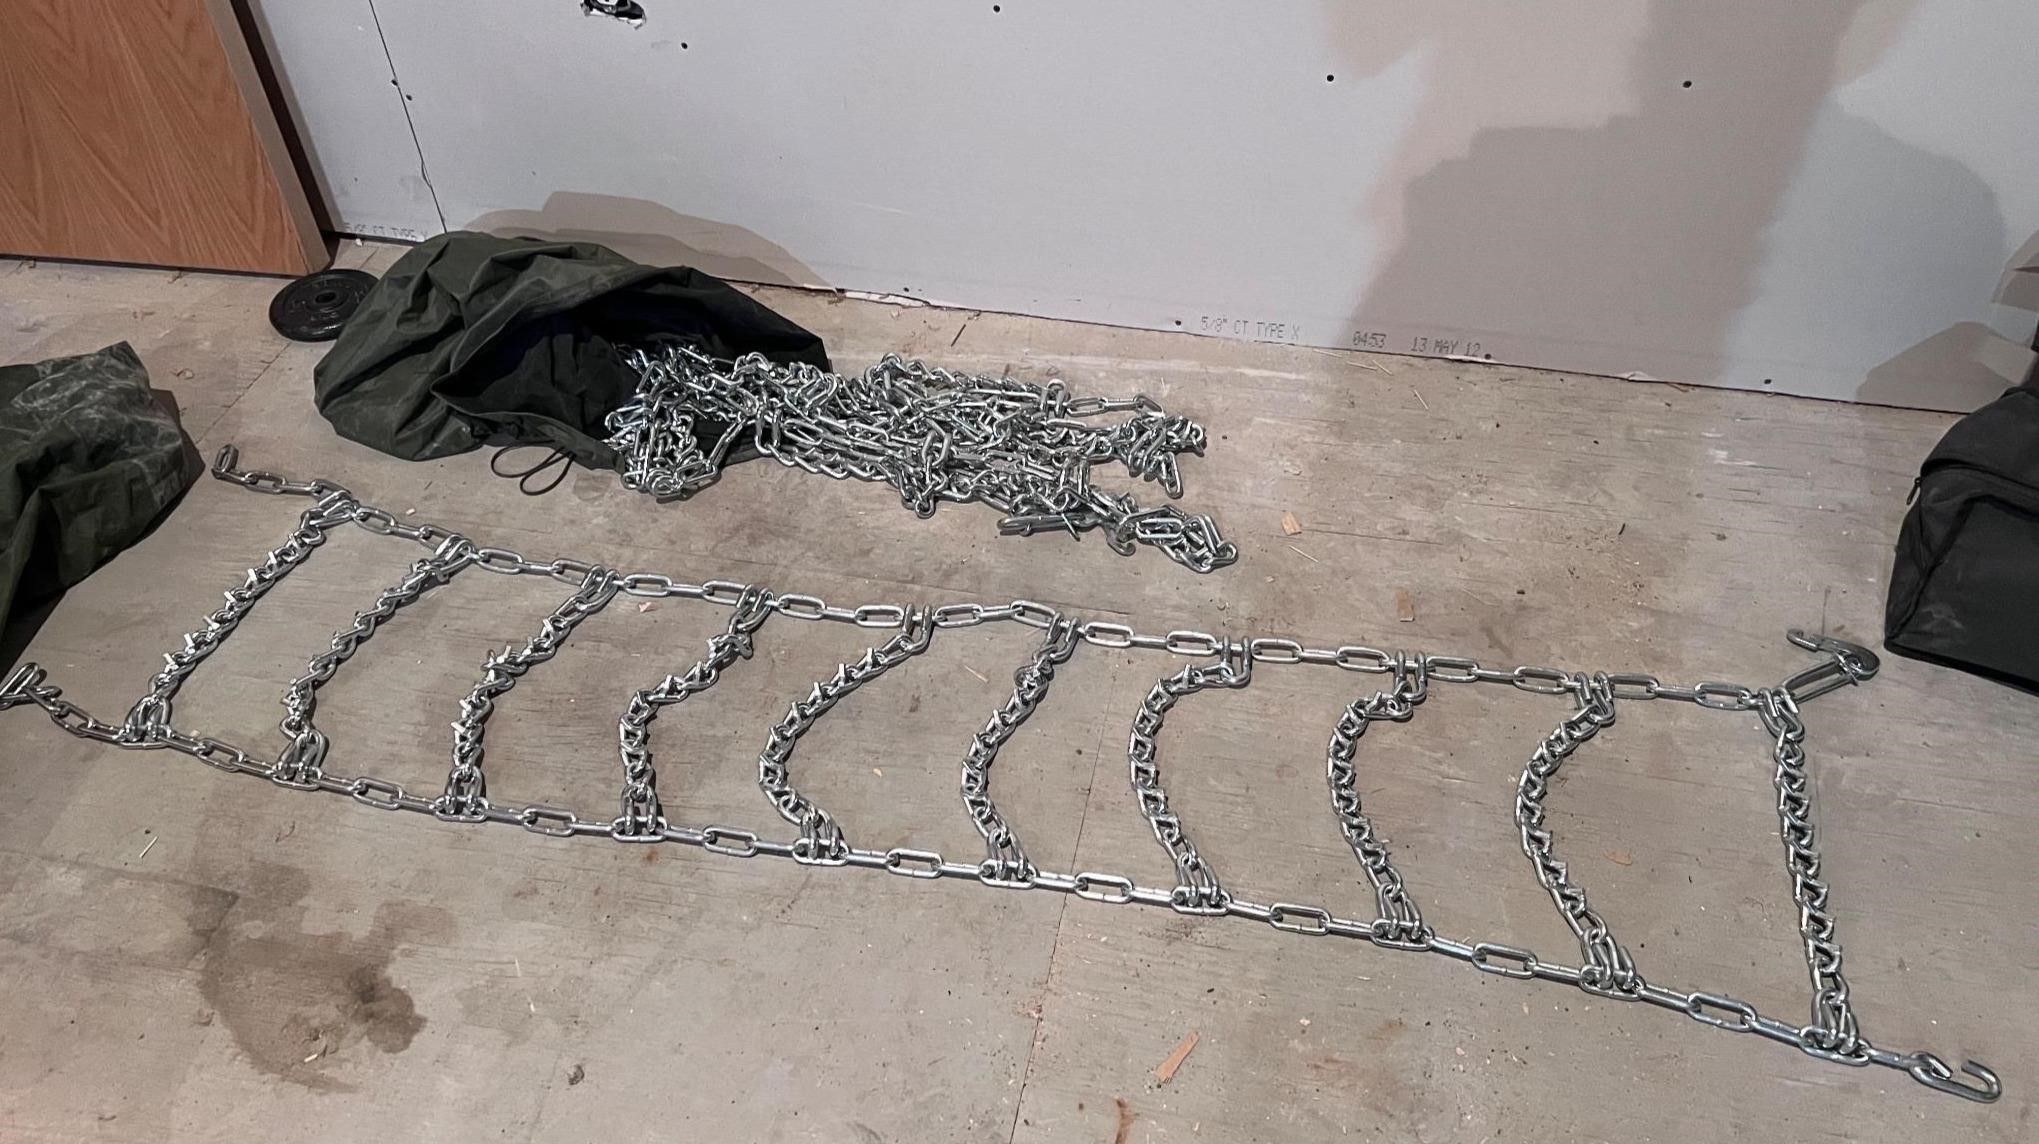 4x New Tire Chains, 76” in Length